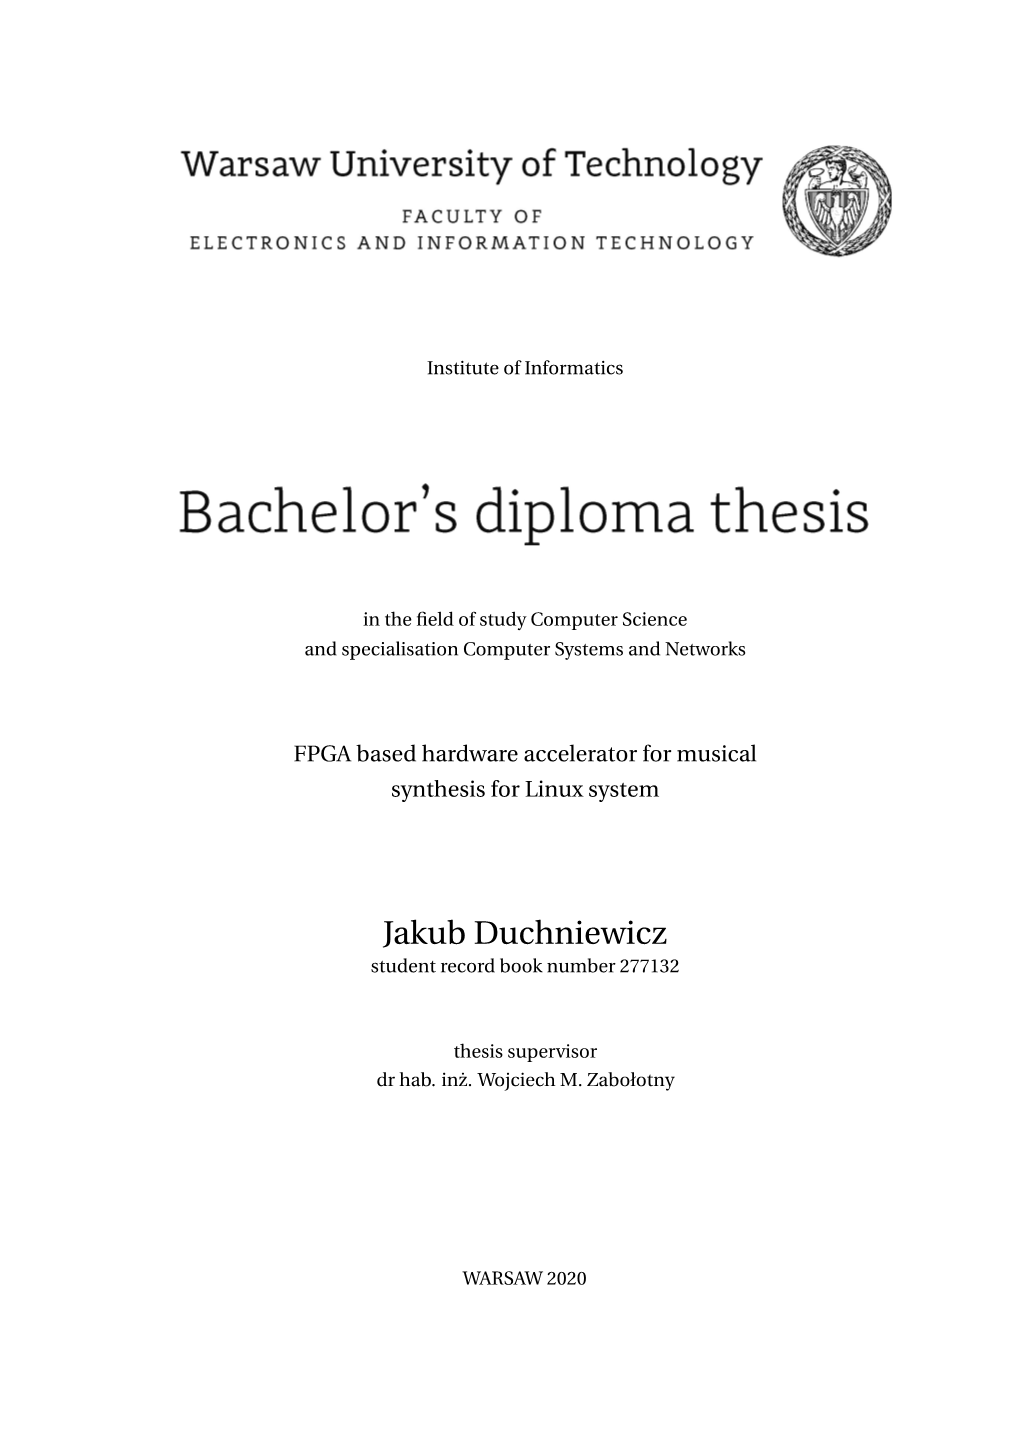 Hereby Certify That I Wrote My Diploma Thesis on My Own, Under the Guidance of the Thesis Supervisor